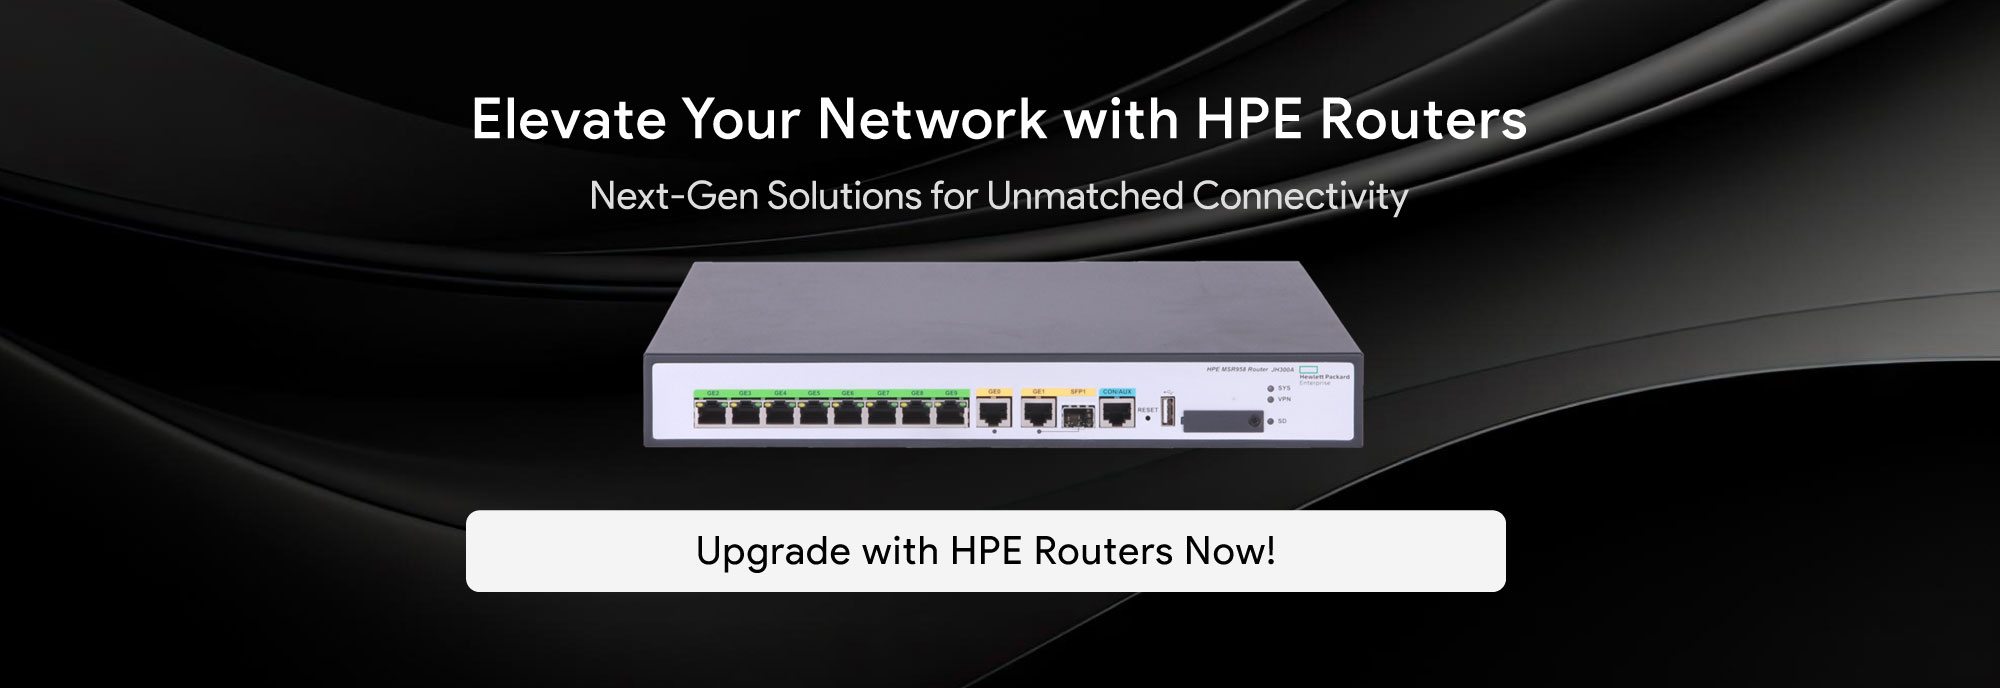 HPE-Routers